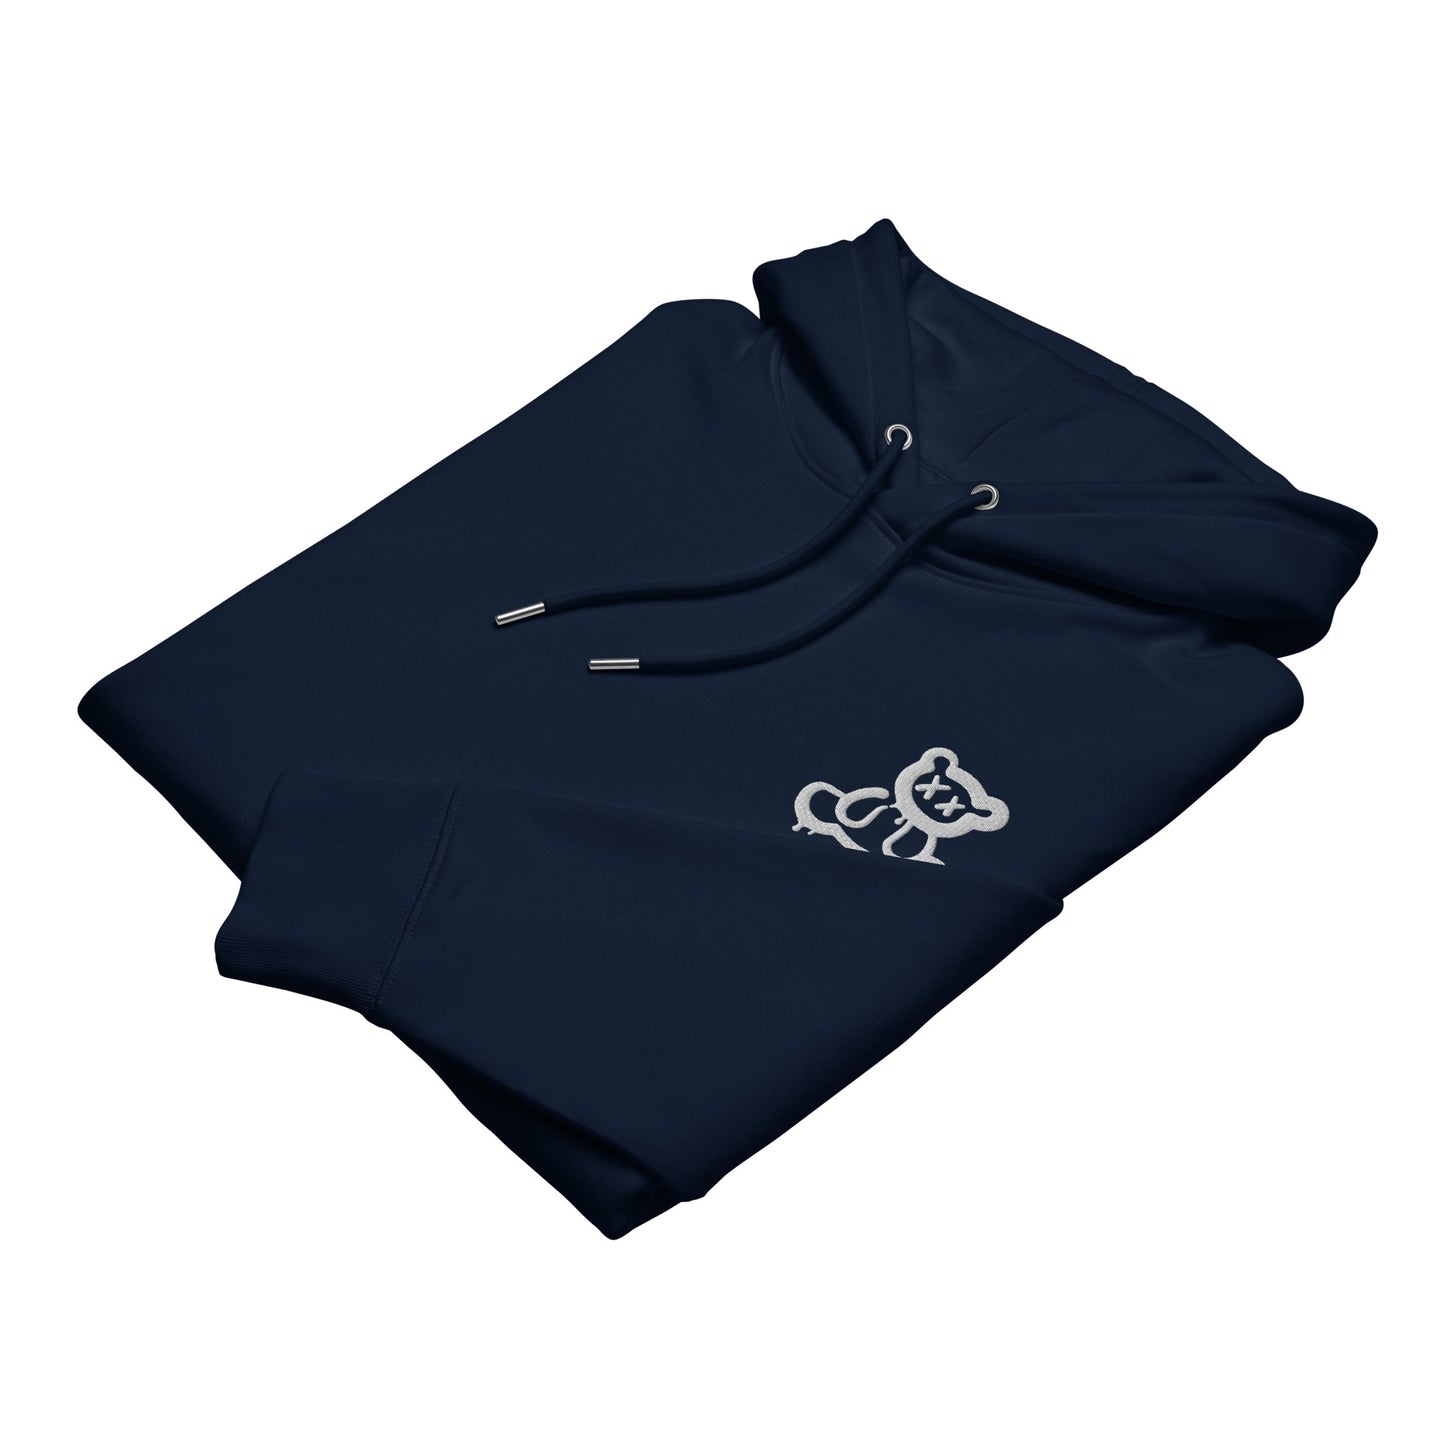 Unisex eco-friendly french navy hoodie featuring on the upper left chest; a subtle embroidered graffiti bear in white, adding a touch of lgbtq to your outfit. sizes: small, medium, large, extra large, double extra large.